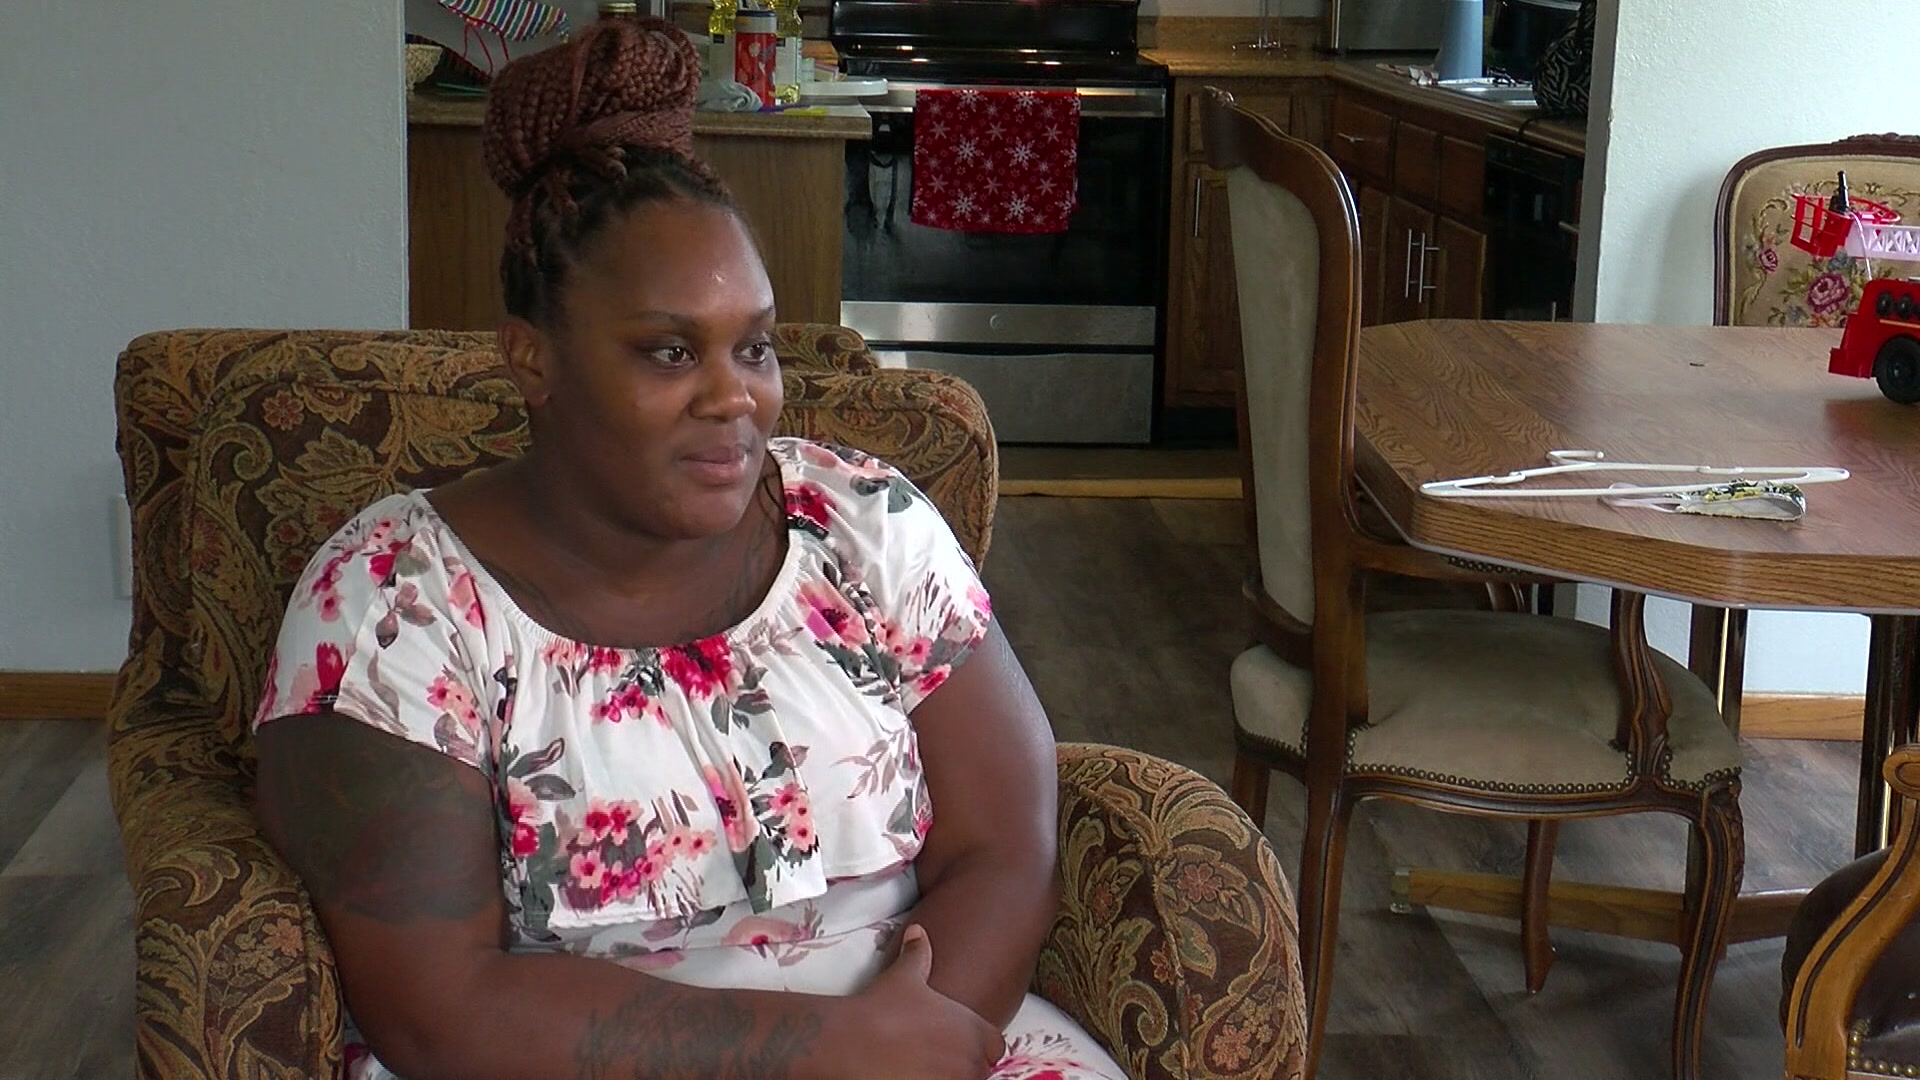 MACV Helps Get Veteran And Her Family Permanent Home: ‘I Was Helped, So I’ll Help’